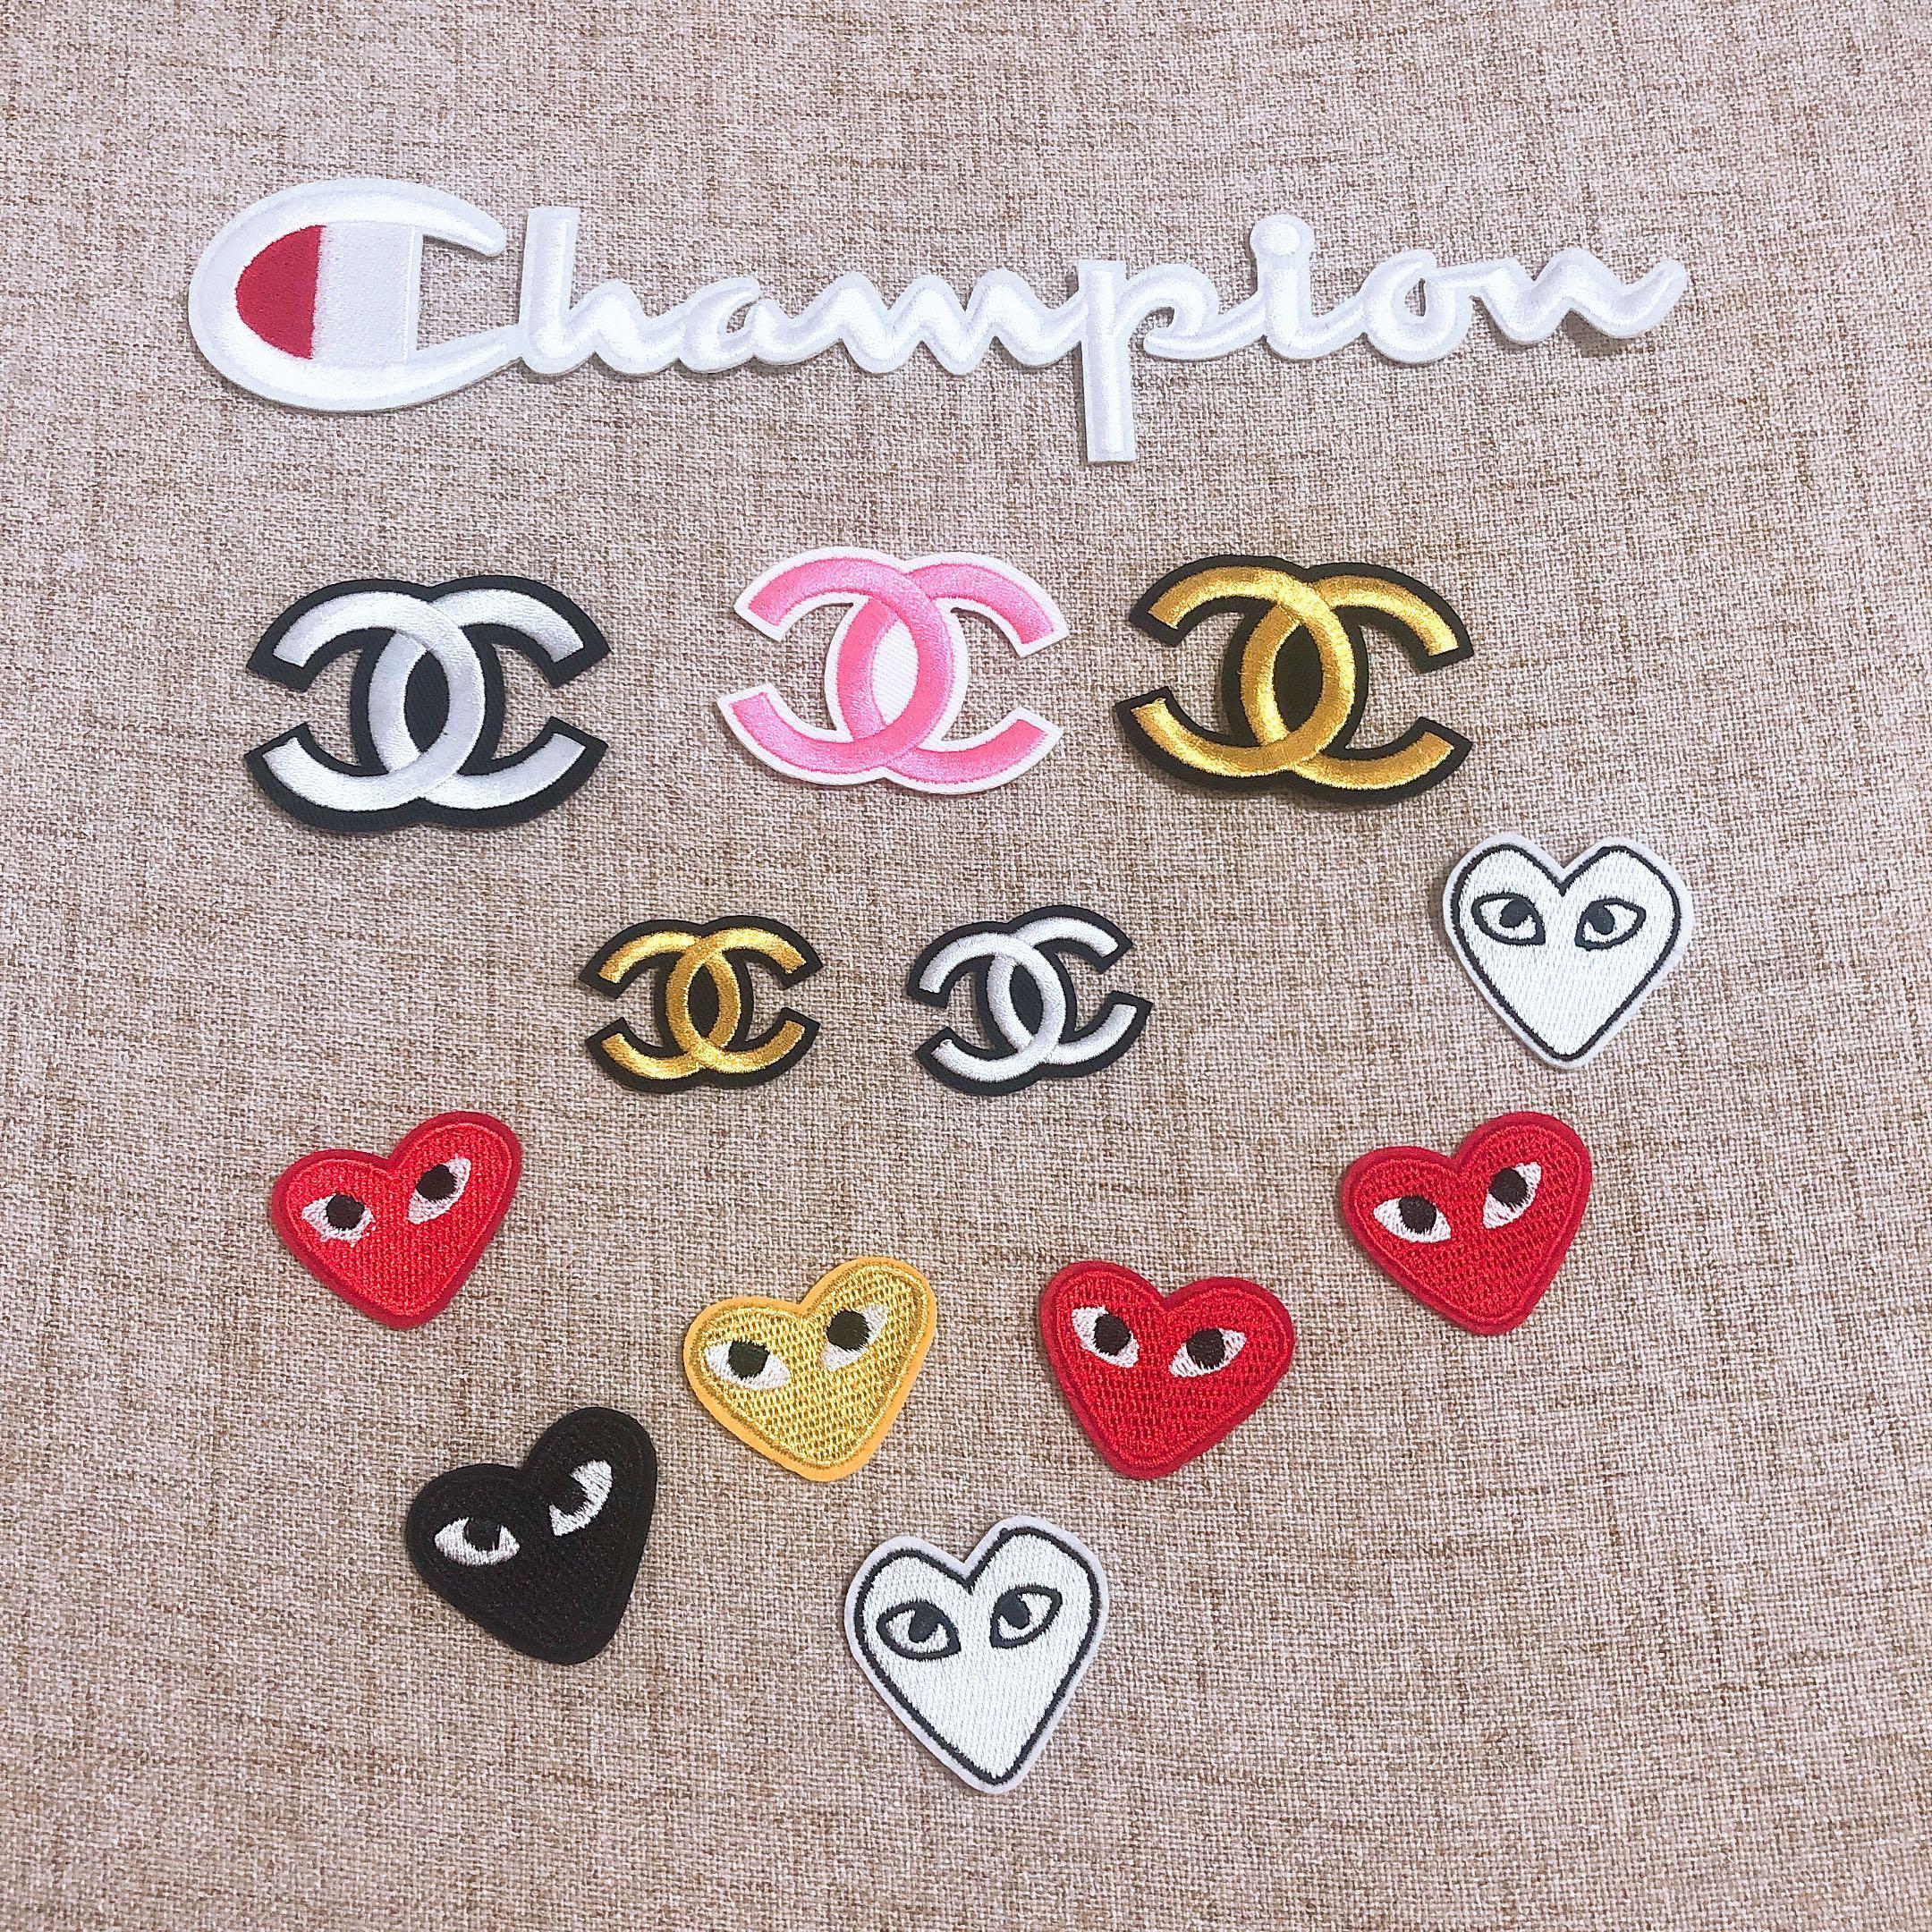 Chanel ironing patches